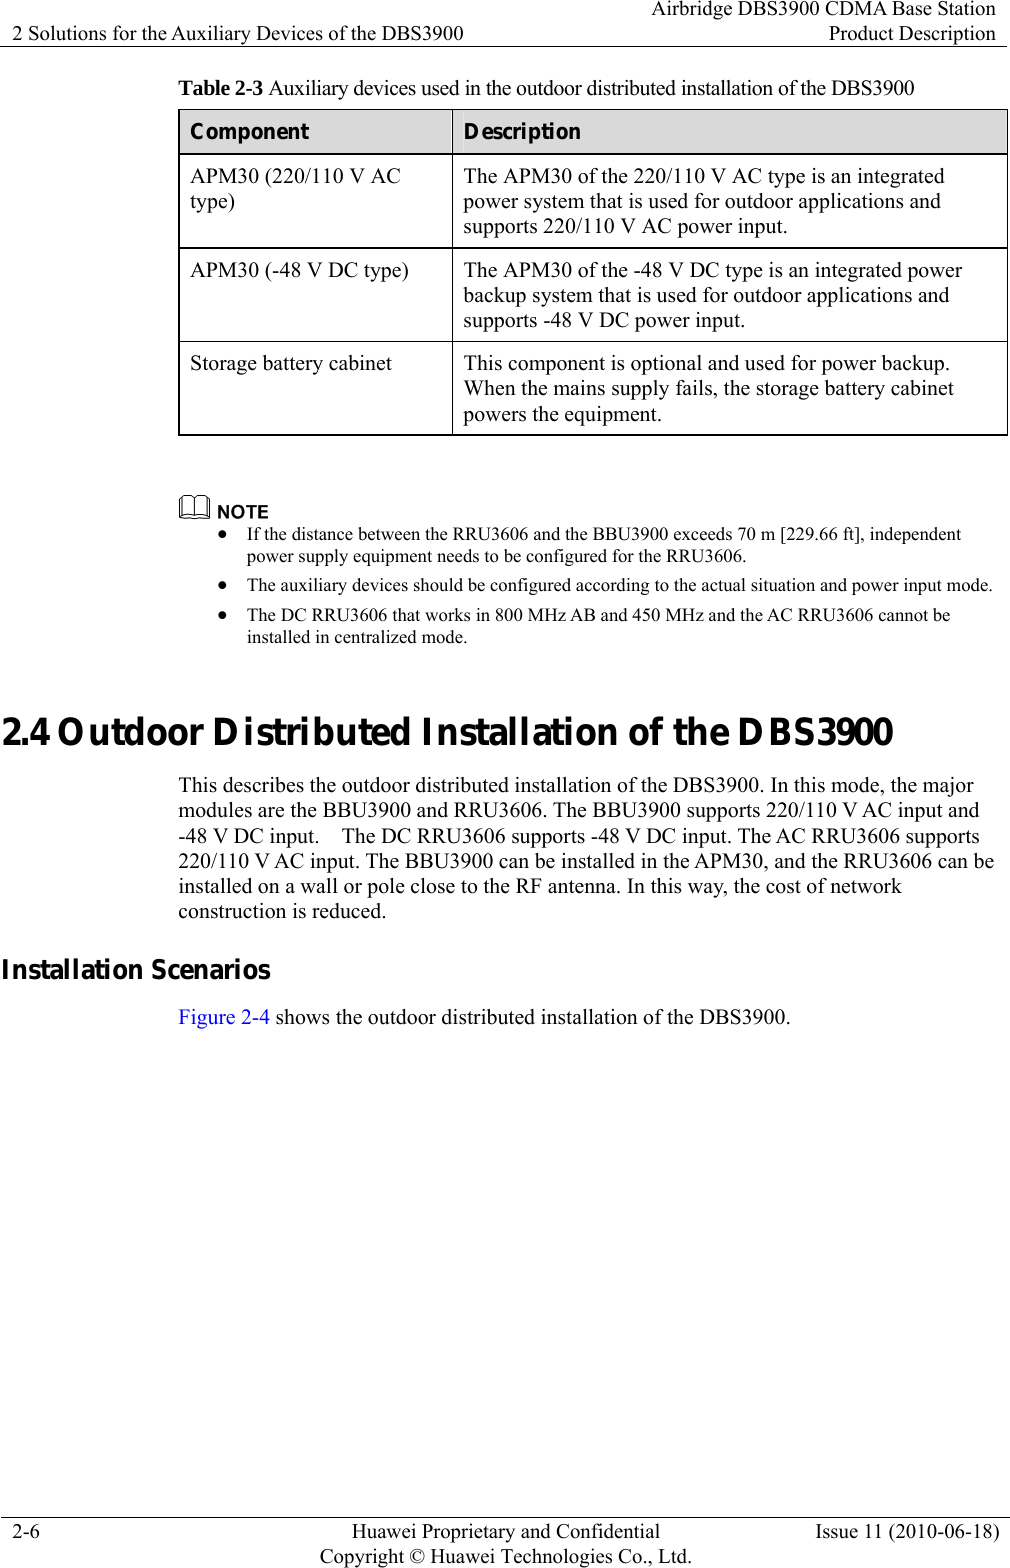 2 Solutions for the Auxiliary Devices of the DBS3900 Airbridge DBS3900 CDMA Base StationProduct Description 2-6  Huawei Proprietary and Confidential     Copyright © Huawei Technologies Co., Ltd.Issue 11 (2010-06-18) Table 2-3 Auxiliary devices used in the outdoor distributed installation of the DBS3900 Component  Description APM30 (220/110 V AC type) The APM30 of the 220/110 V AC type is an integrated power system that is used for outdoor applications and supports 220/110 V AC power input. APM30 (-48 V DC type)  The APM30 of the -48 V DC type is an integrated power backup system that is used for outdoor applications and supports -48 V DC power input. Storage battery cabinet  This component is optional and used for power backup. When the mains supply fails, the storage battery cabinet powers the equipment.   z If the distance between the RRU3606 and the BBU3900 exceeds 70 m [229.66 ft], independent power supply equipment needs to be configured for the RRU3606. z The auxiliary devices should be configured according to the actual situation and power input mode. z The DC RRU3606 that works in 800 MHz AB and 450 MHz and the AC RRU3606 cannot be installed in centralized mode. 2.4 Outdoor Distributed Installation of the DBS3900 This describes the outdoor distributed installation of the DBS3900. In this mode, the major modules are the BBU3900 and RRU3606. The BBU3900 supports 220/110 V AC input and -48 V DC input.    The DC RRU3606 supports -48 V DC input. The AC RRU3606 supports 220/110 V AC input. The BBU3900 can be installed in the APM30, and the RRU3606 can be installed on a wall or pole close to the RF antenna. In this way, the cost of network construction is reduced. Installation Scenarios Figure 2-4 shows the outdoor distributed installation of the DBS3900. 